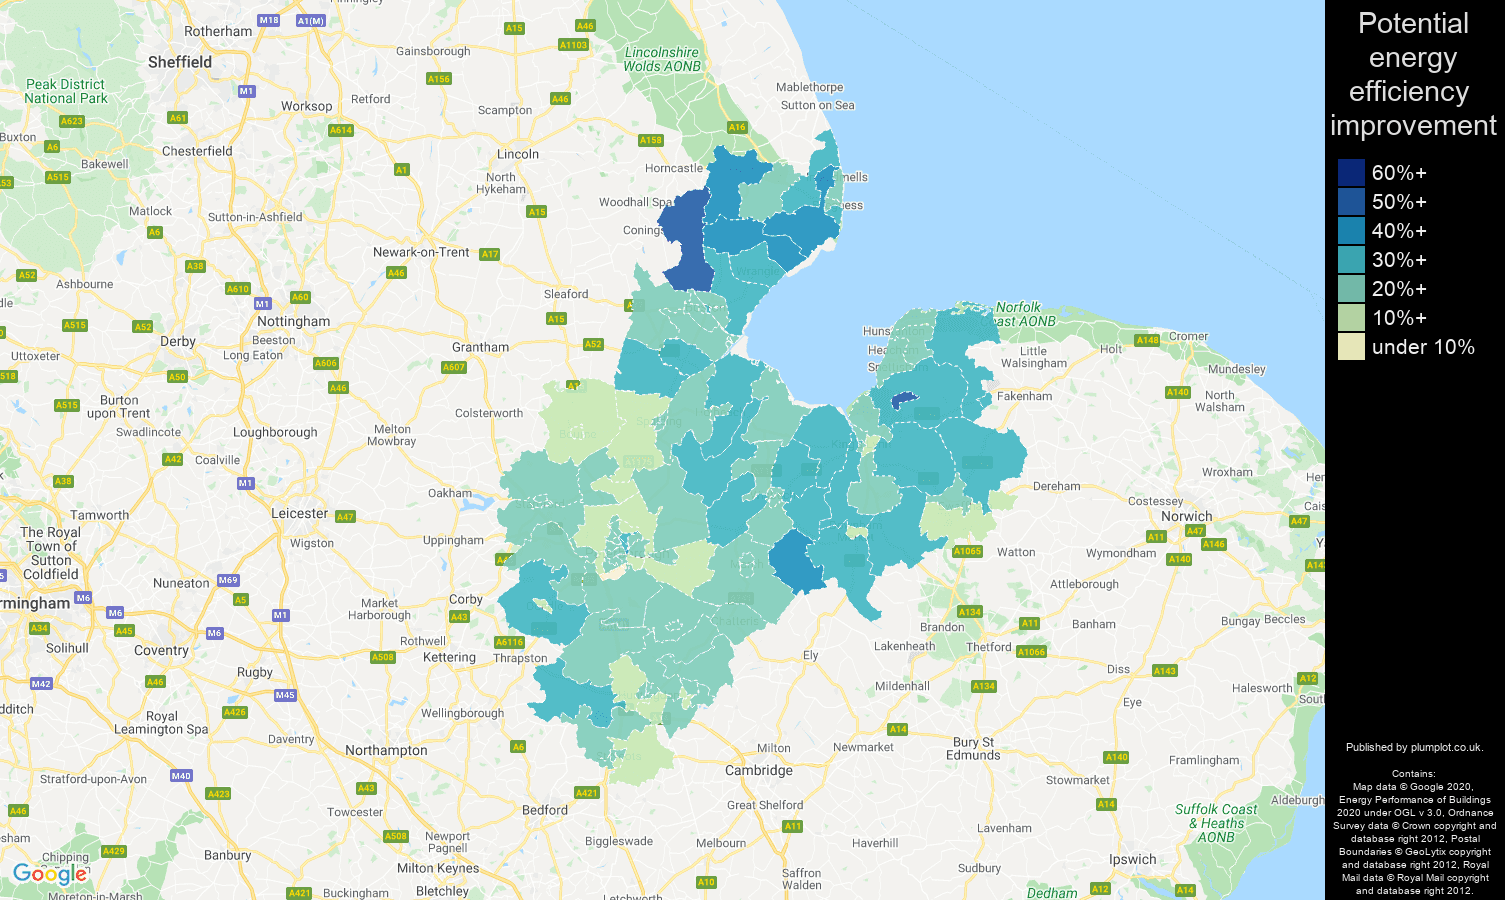 Peterborough map of potential energy efficiency improvement of houses